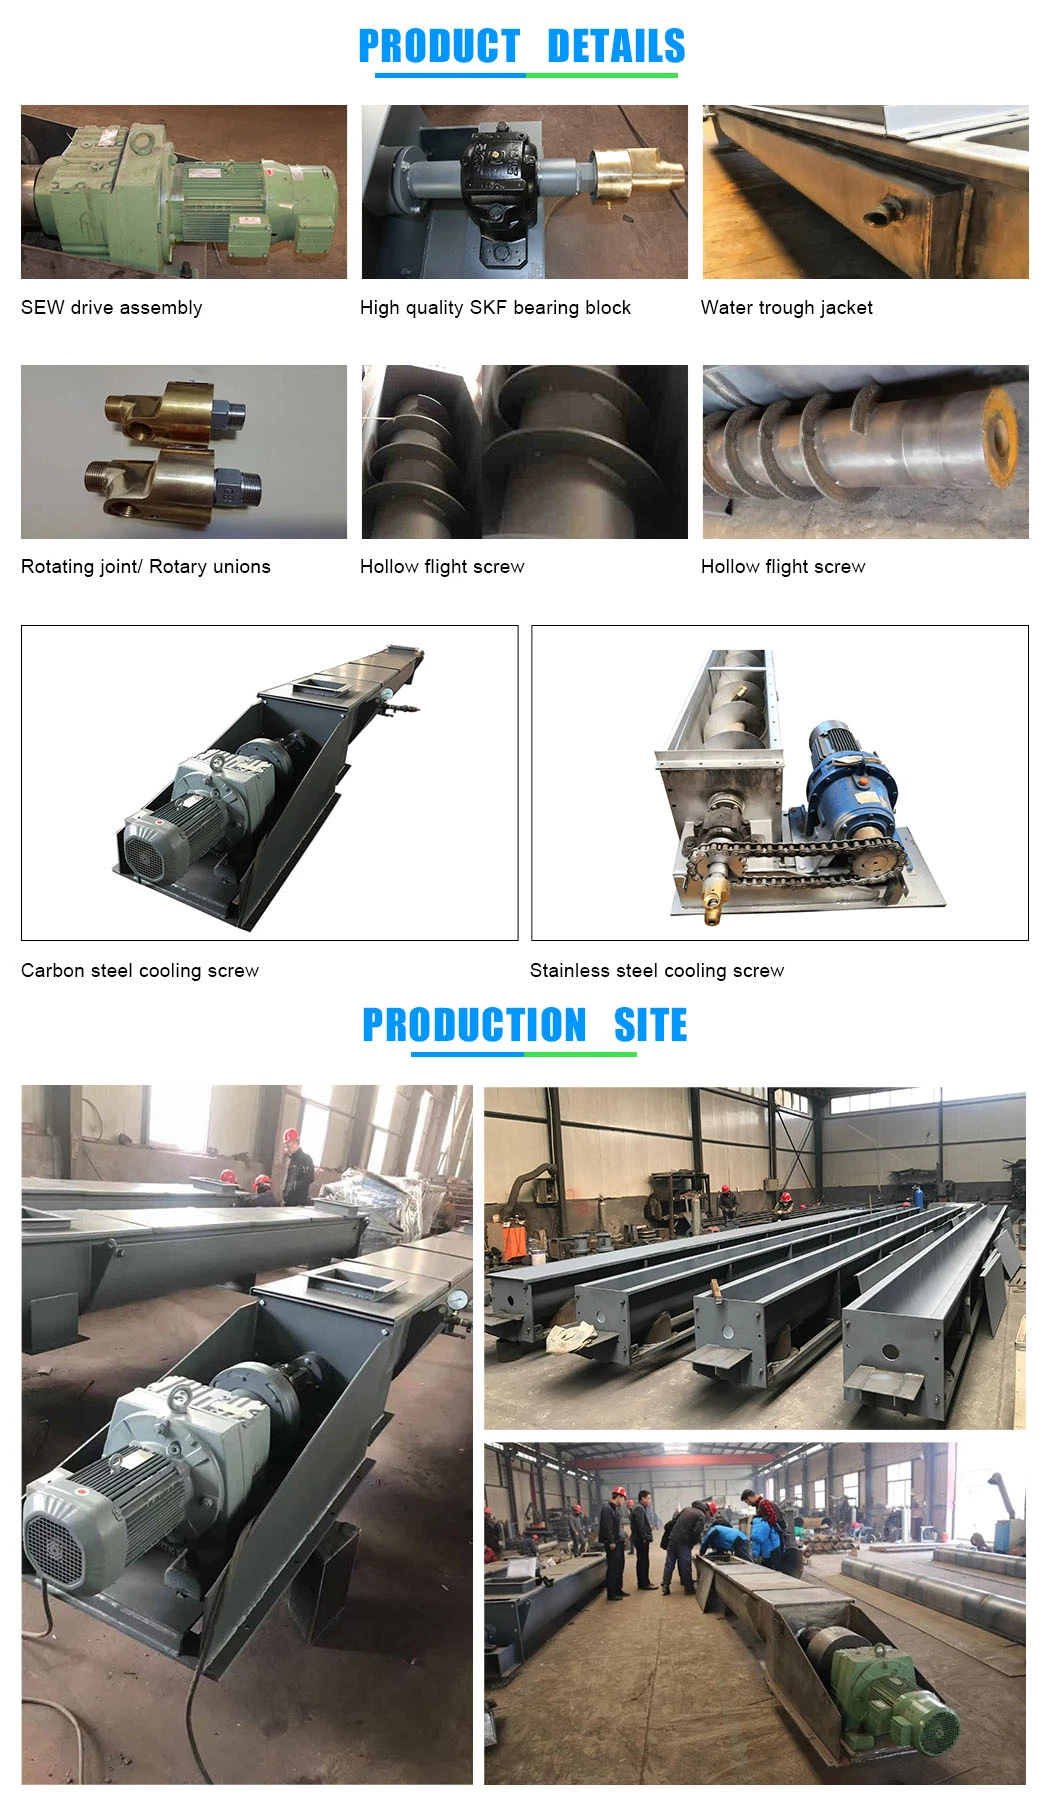 High Performance Heated Screw Conveyor for Conveying High Temperature Materials